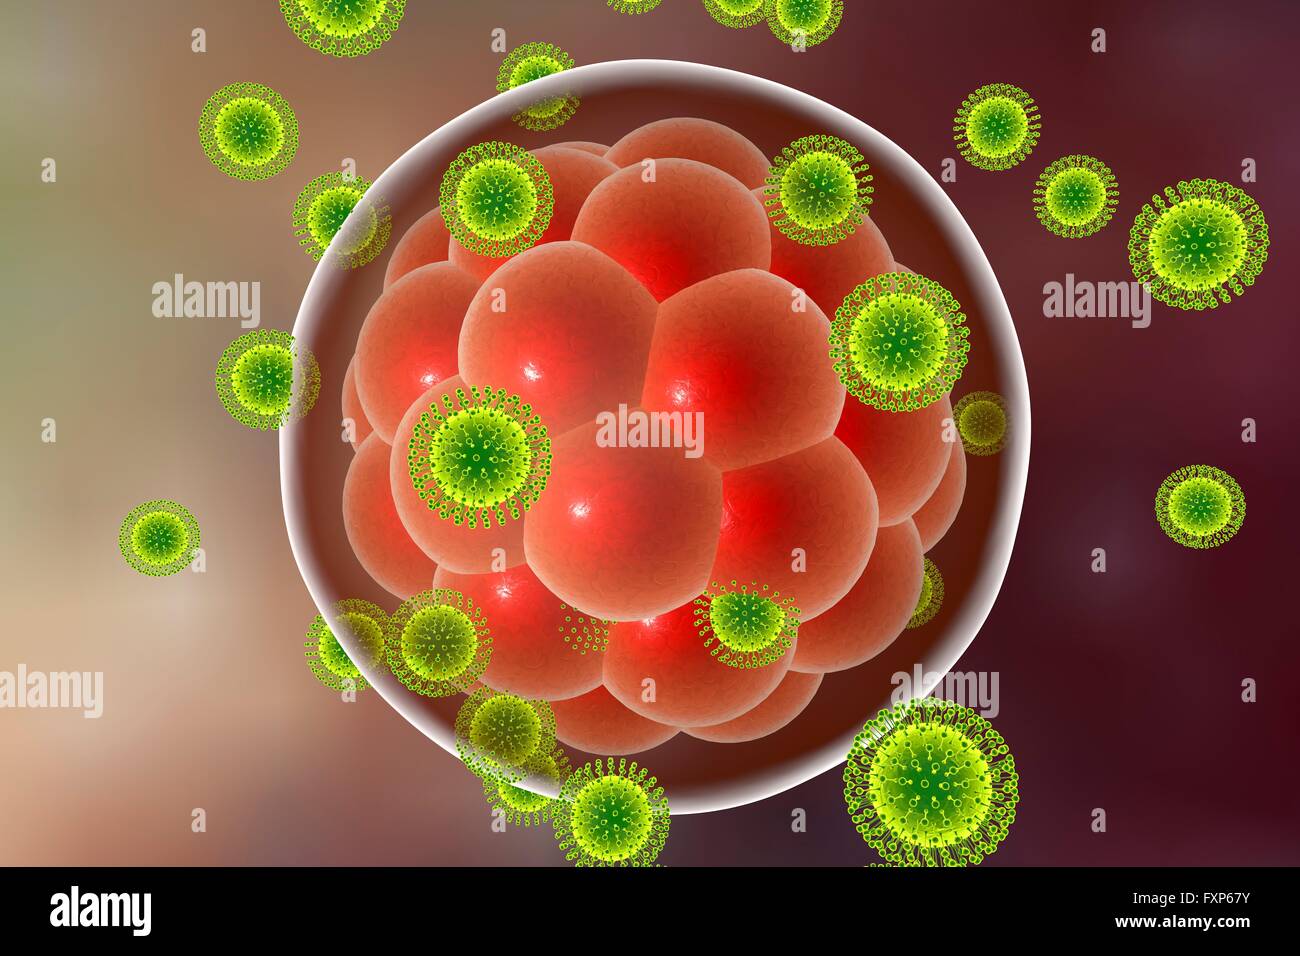 Zika viruses infecting human embryo, computer illustration. This is an RNA (ribonucleic acid) virus from the Flaviviridae family. It is transmitted to humans via the bite of an infected Aedes sp. mosquito. It causes zika fever, a mild disease with symptoms including rash, joint pain and conjunctivitis. In 2015 a previously unknown connection between Zika infection in pregnant women and microcephaly (small head) in newborns was reported. This can cause miscarriage or death soon after birth, or lead to developmental delays and disorders. Stock Photo